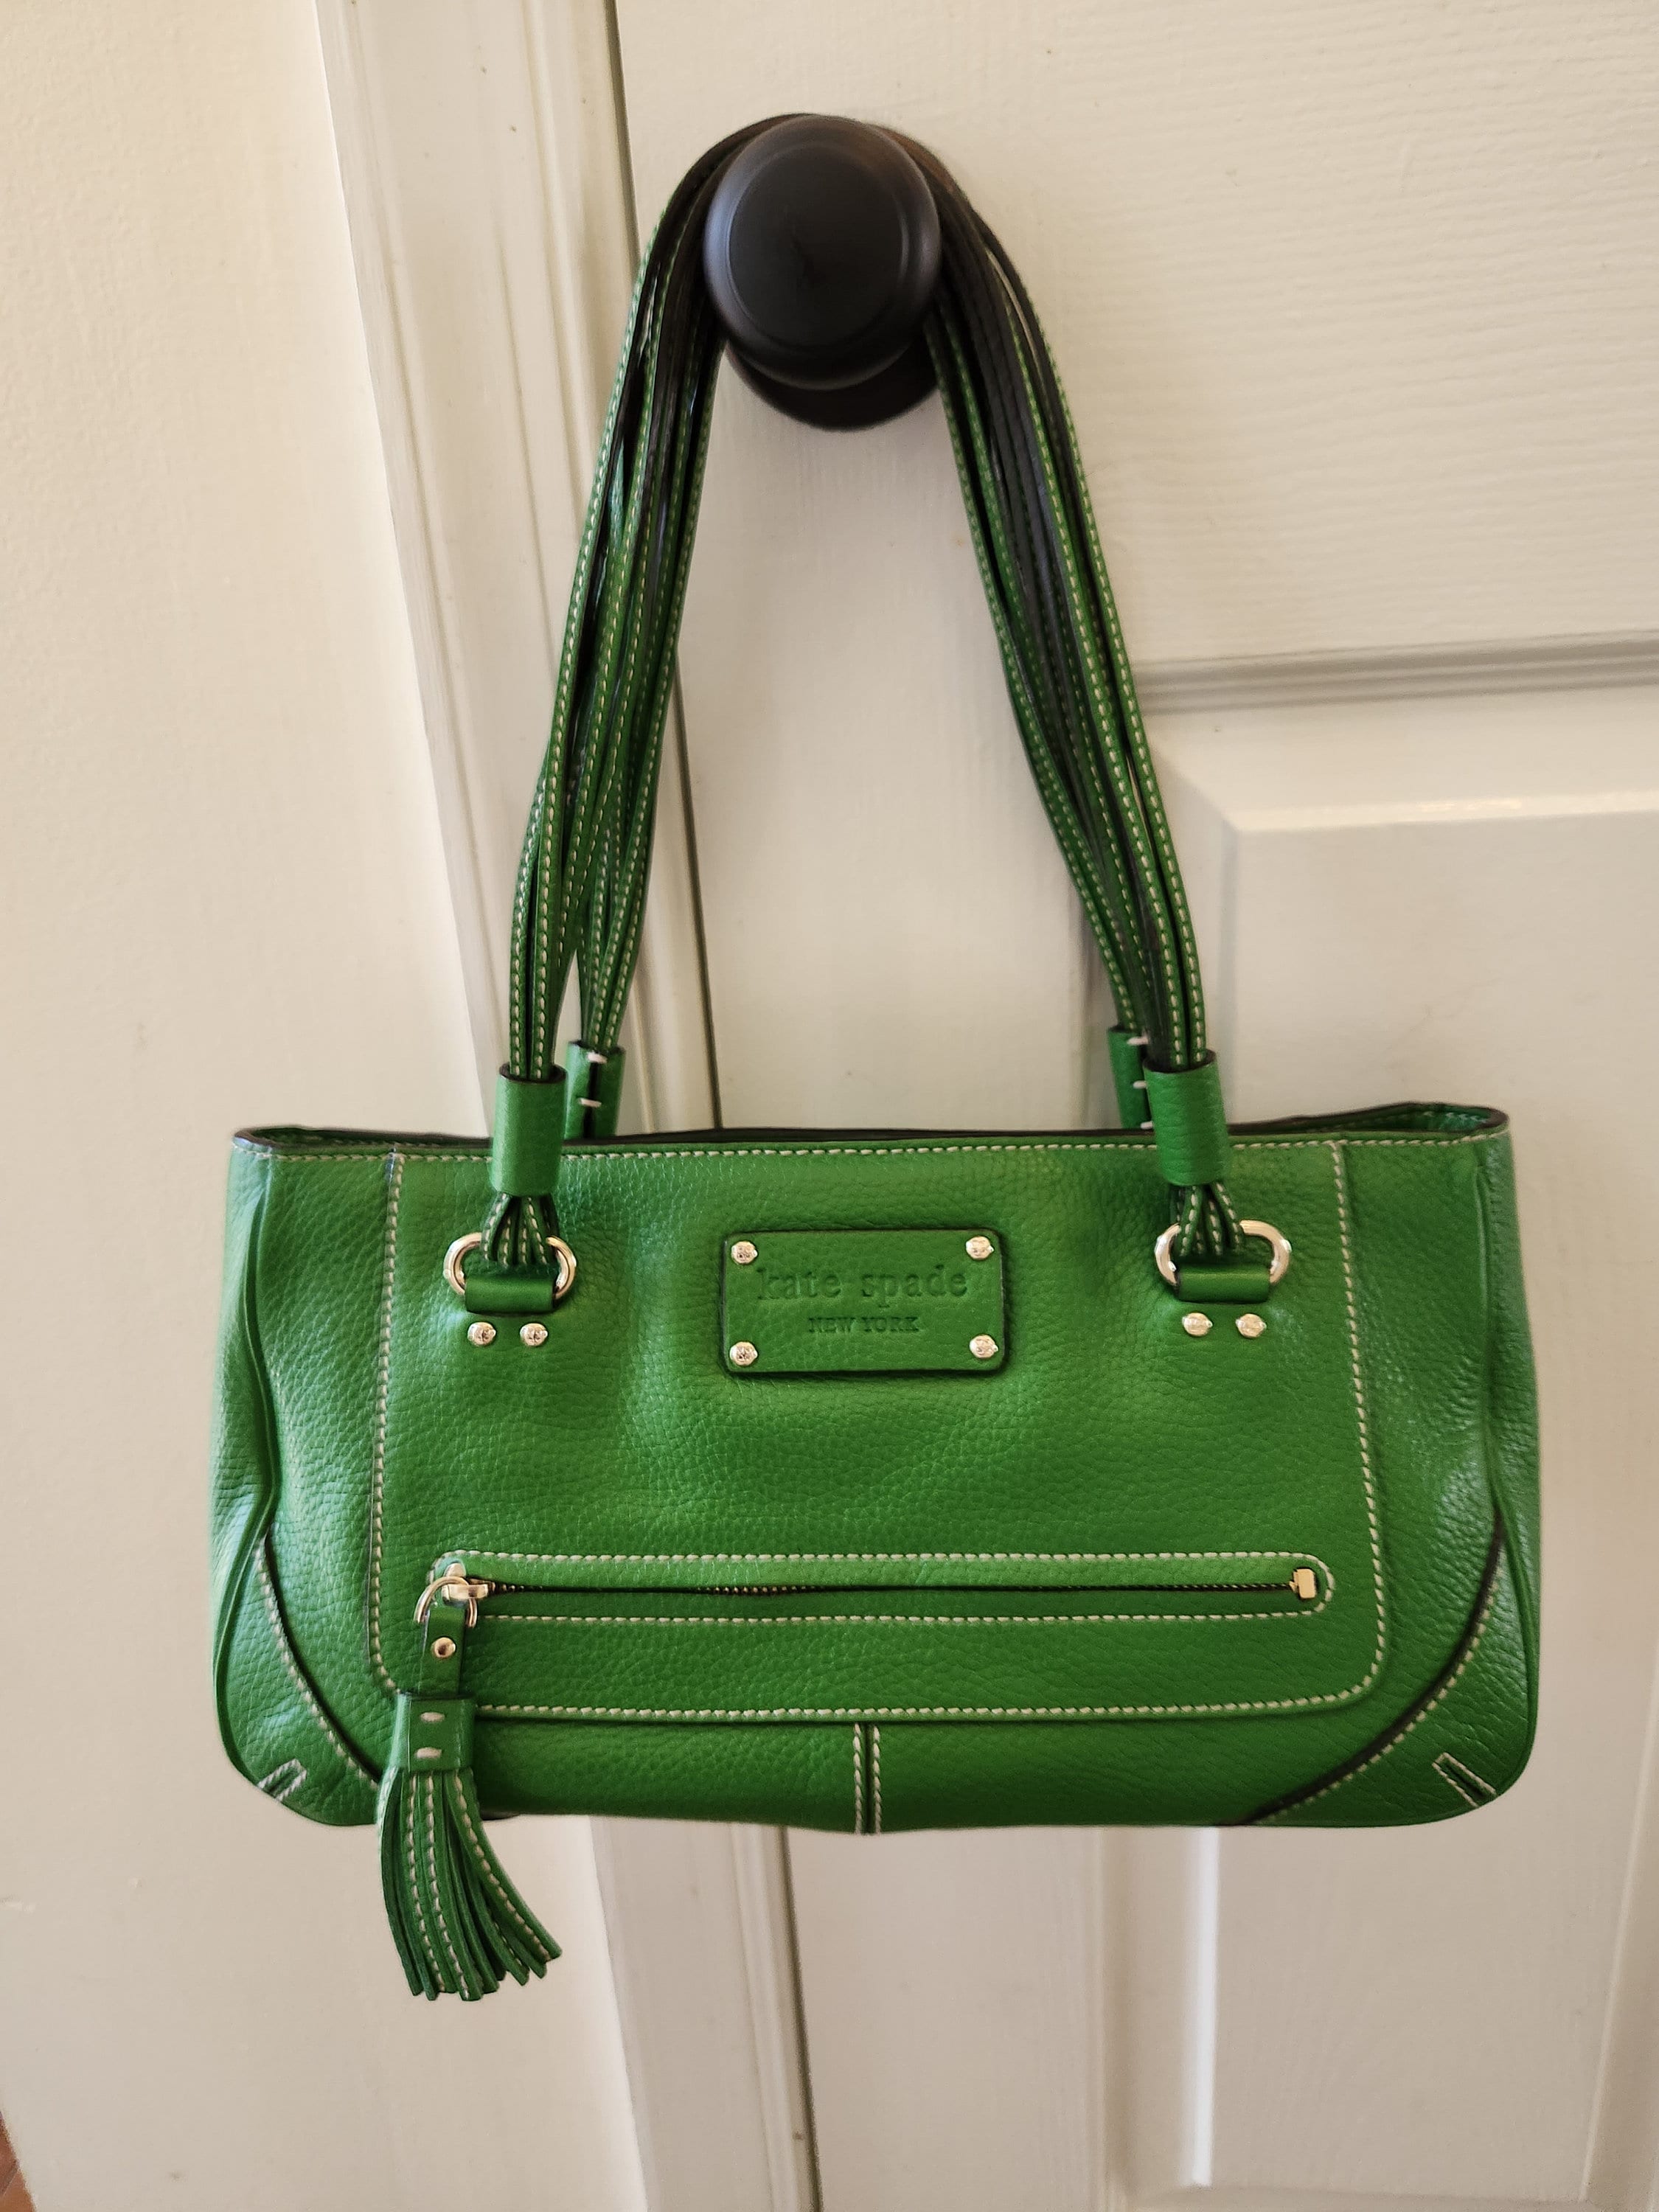 Kate Spade Bag for Sale in Los Angeles, CA - OfferUp